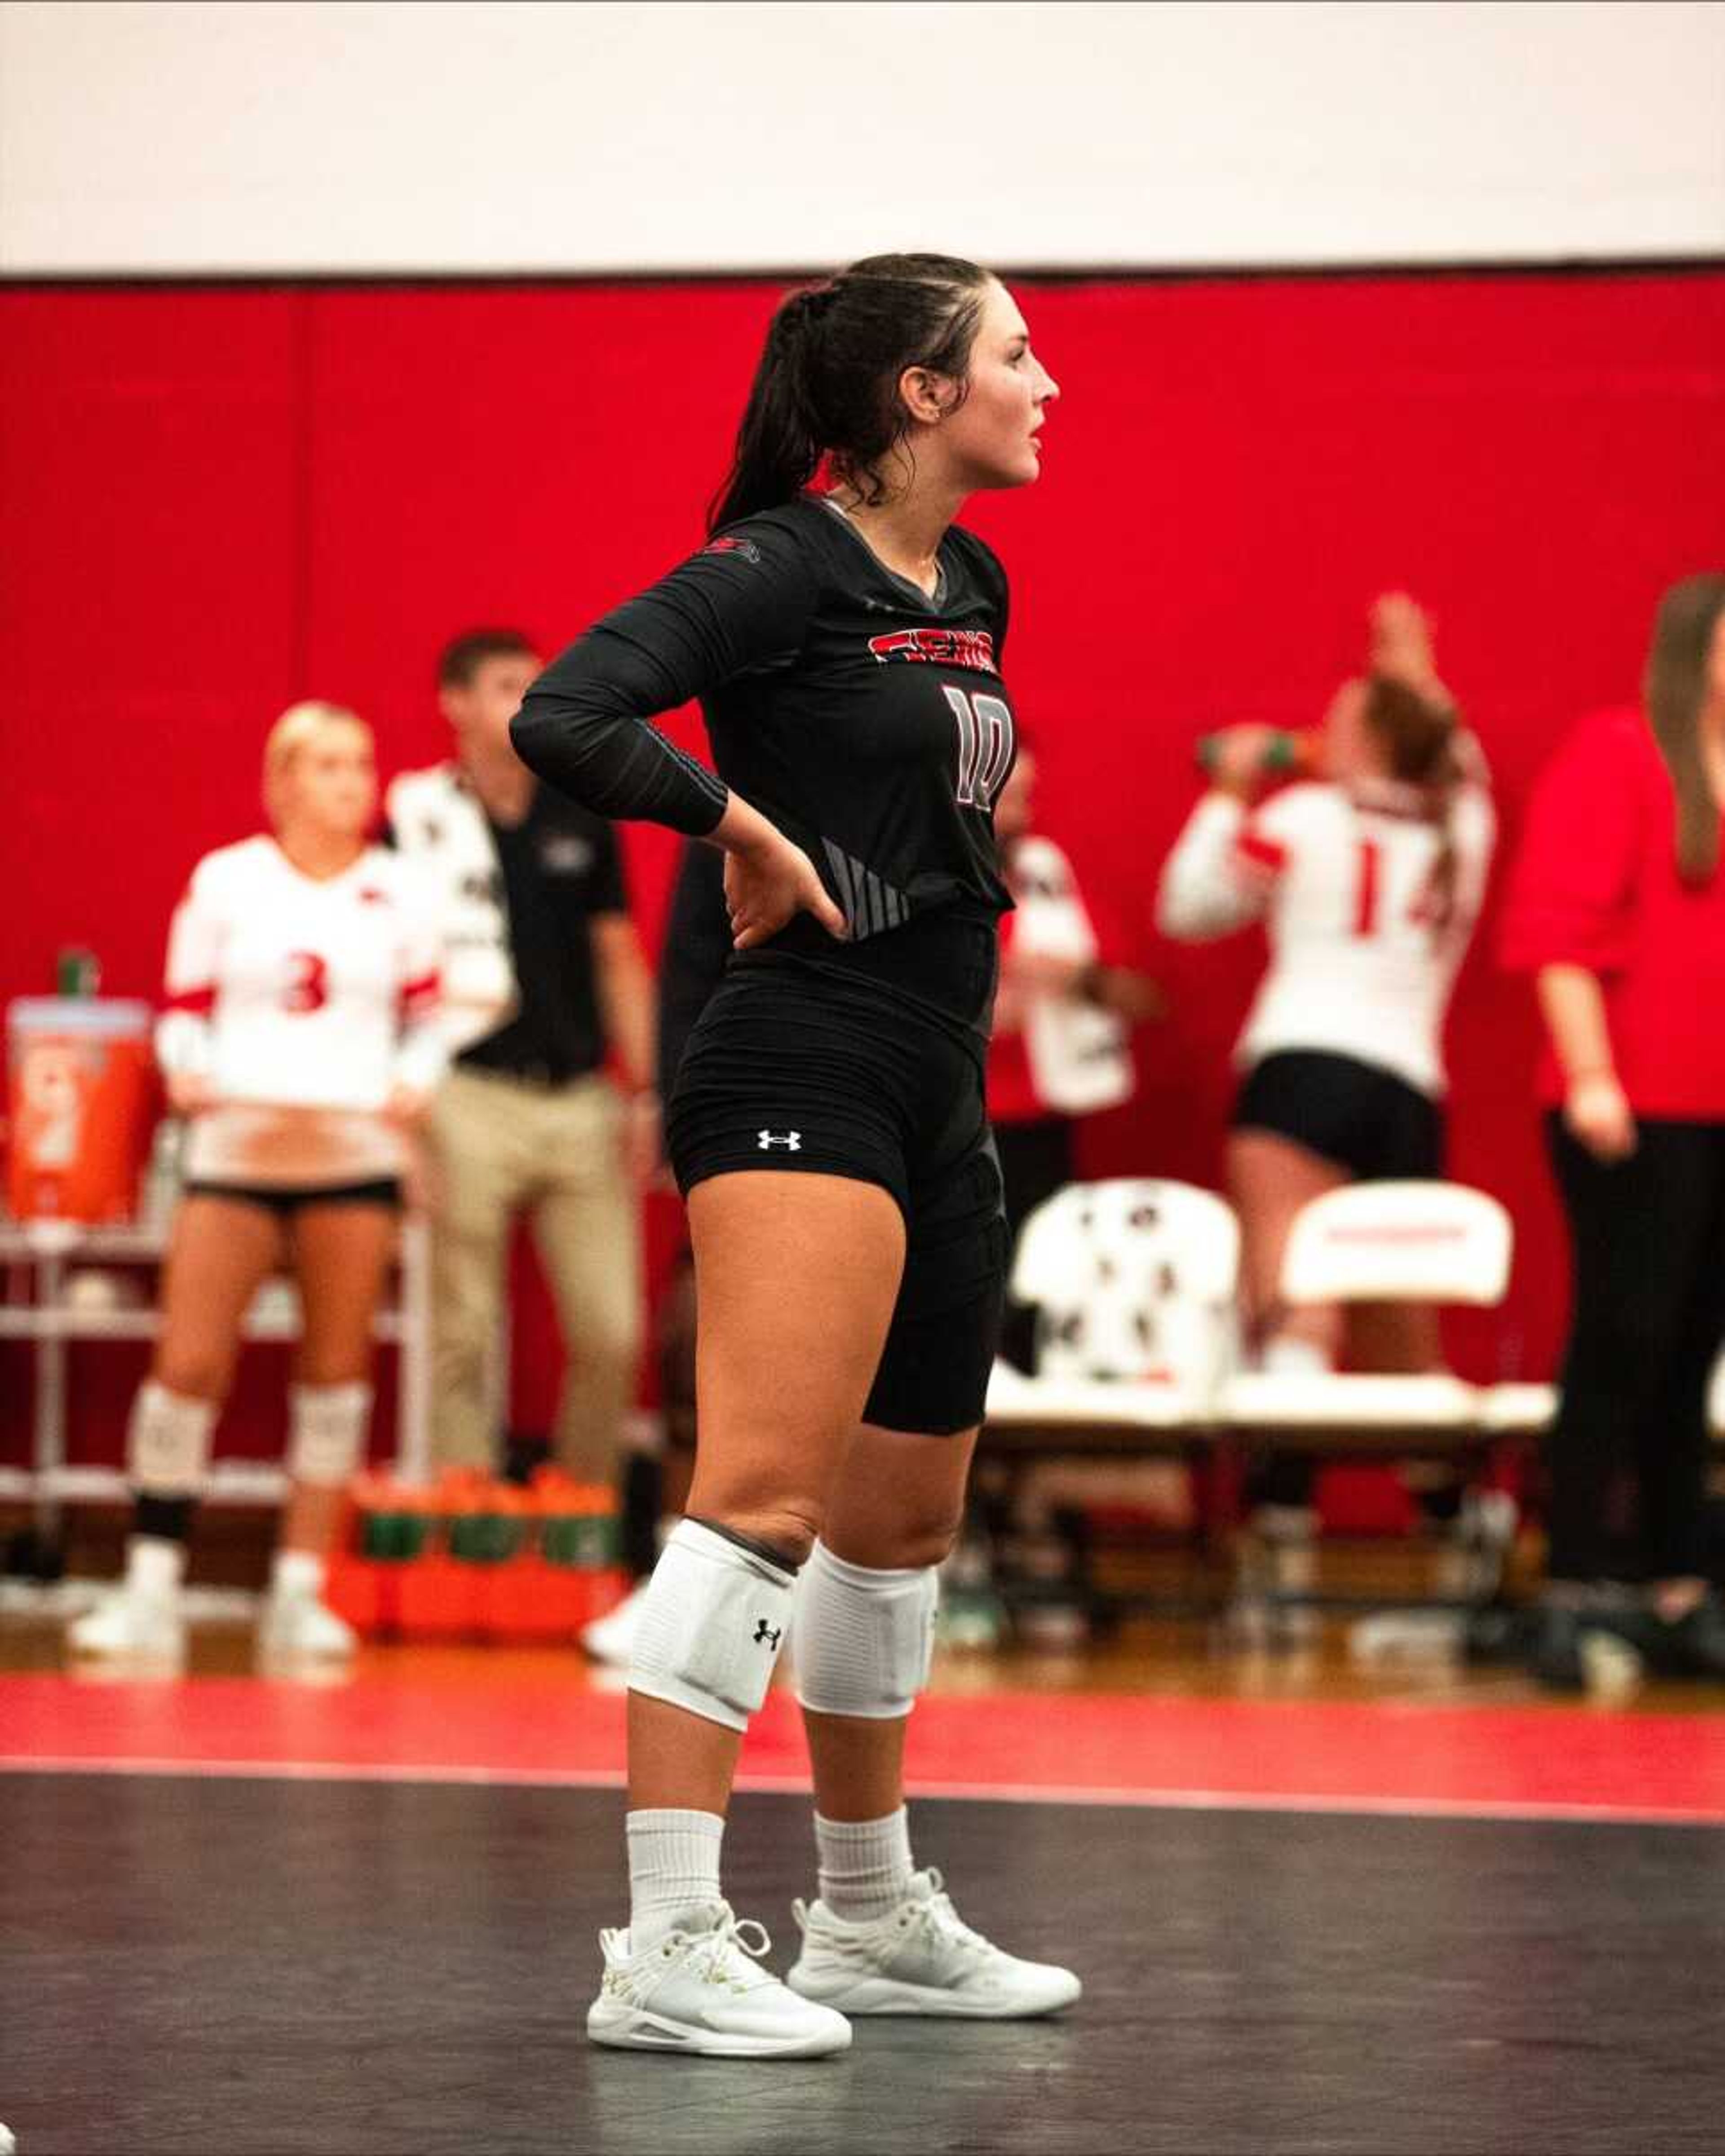 Redhawk Volleyball’s Tara Beilsmith wins OVC Defensive Player of the Year